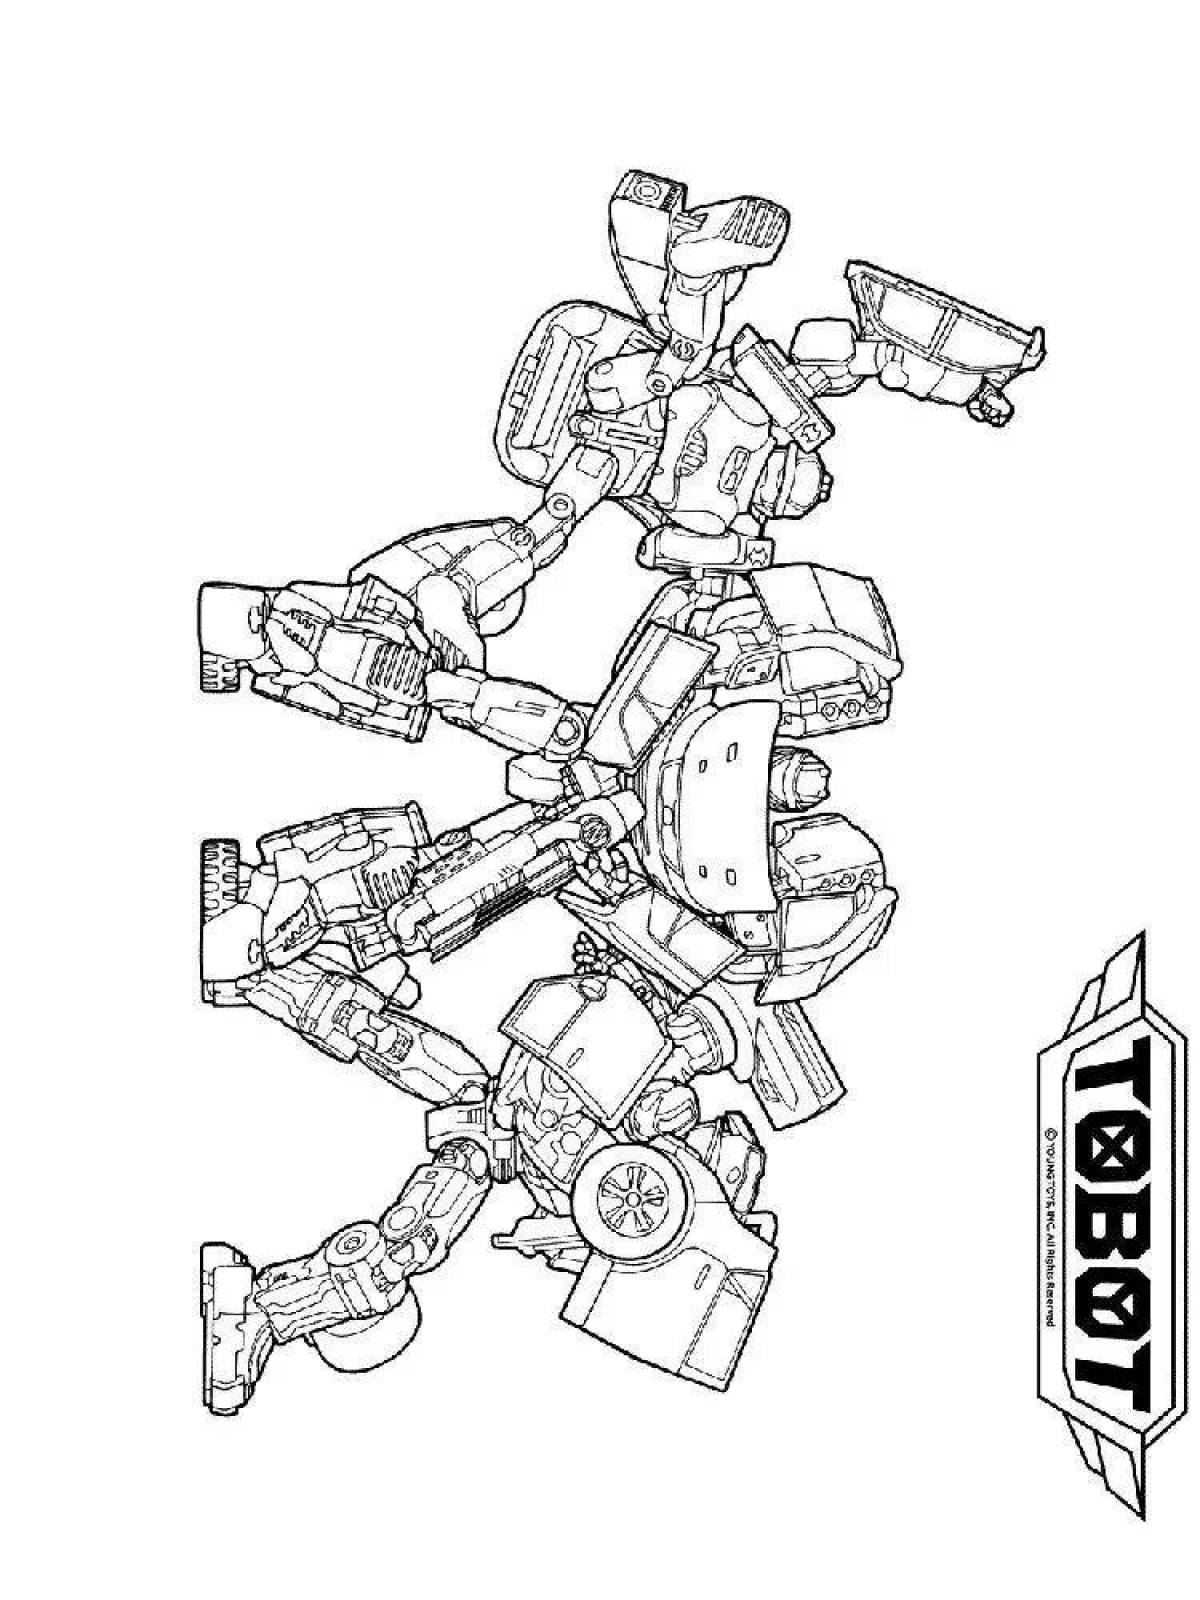 Tobots coloring book in color pack